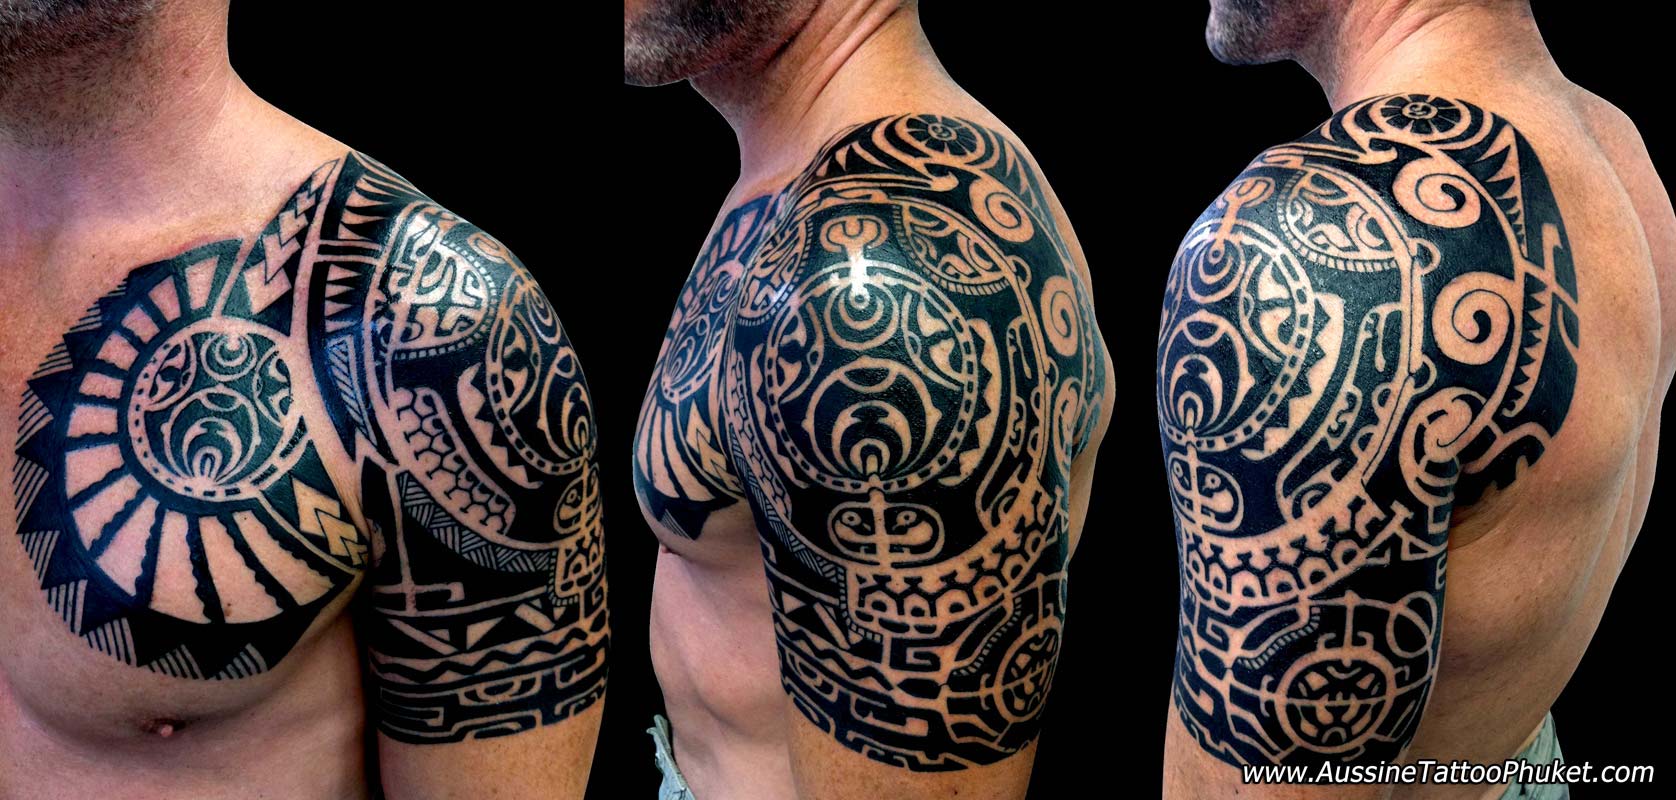 Back Pieces Chest Pieces and Full Bodysuits Oh My Top Torso Tattoos   Tattoodo